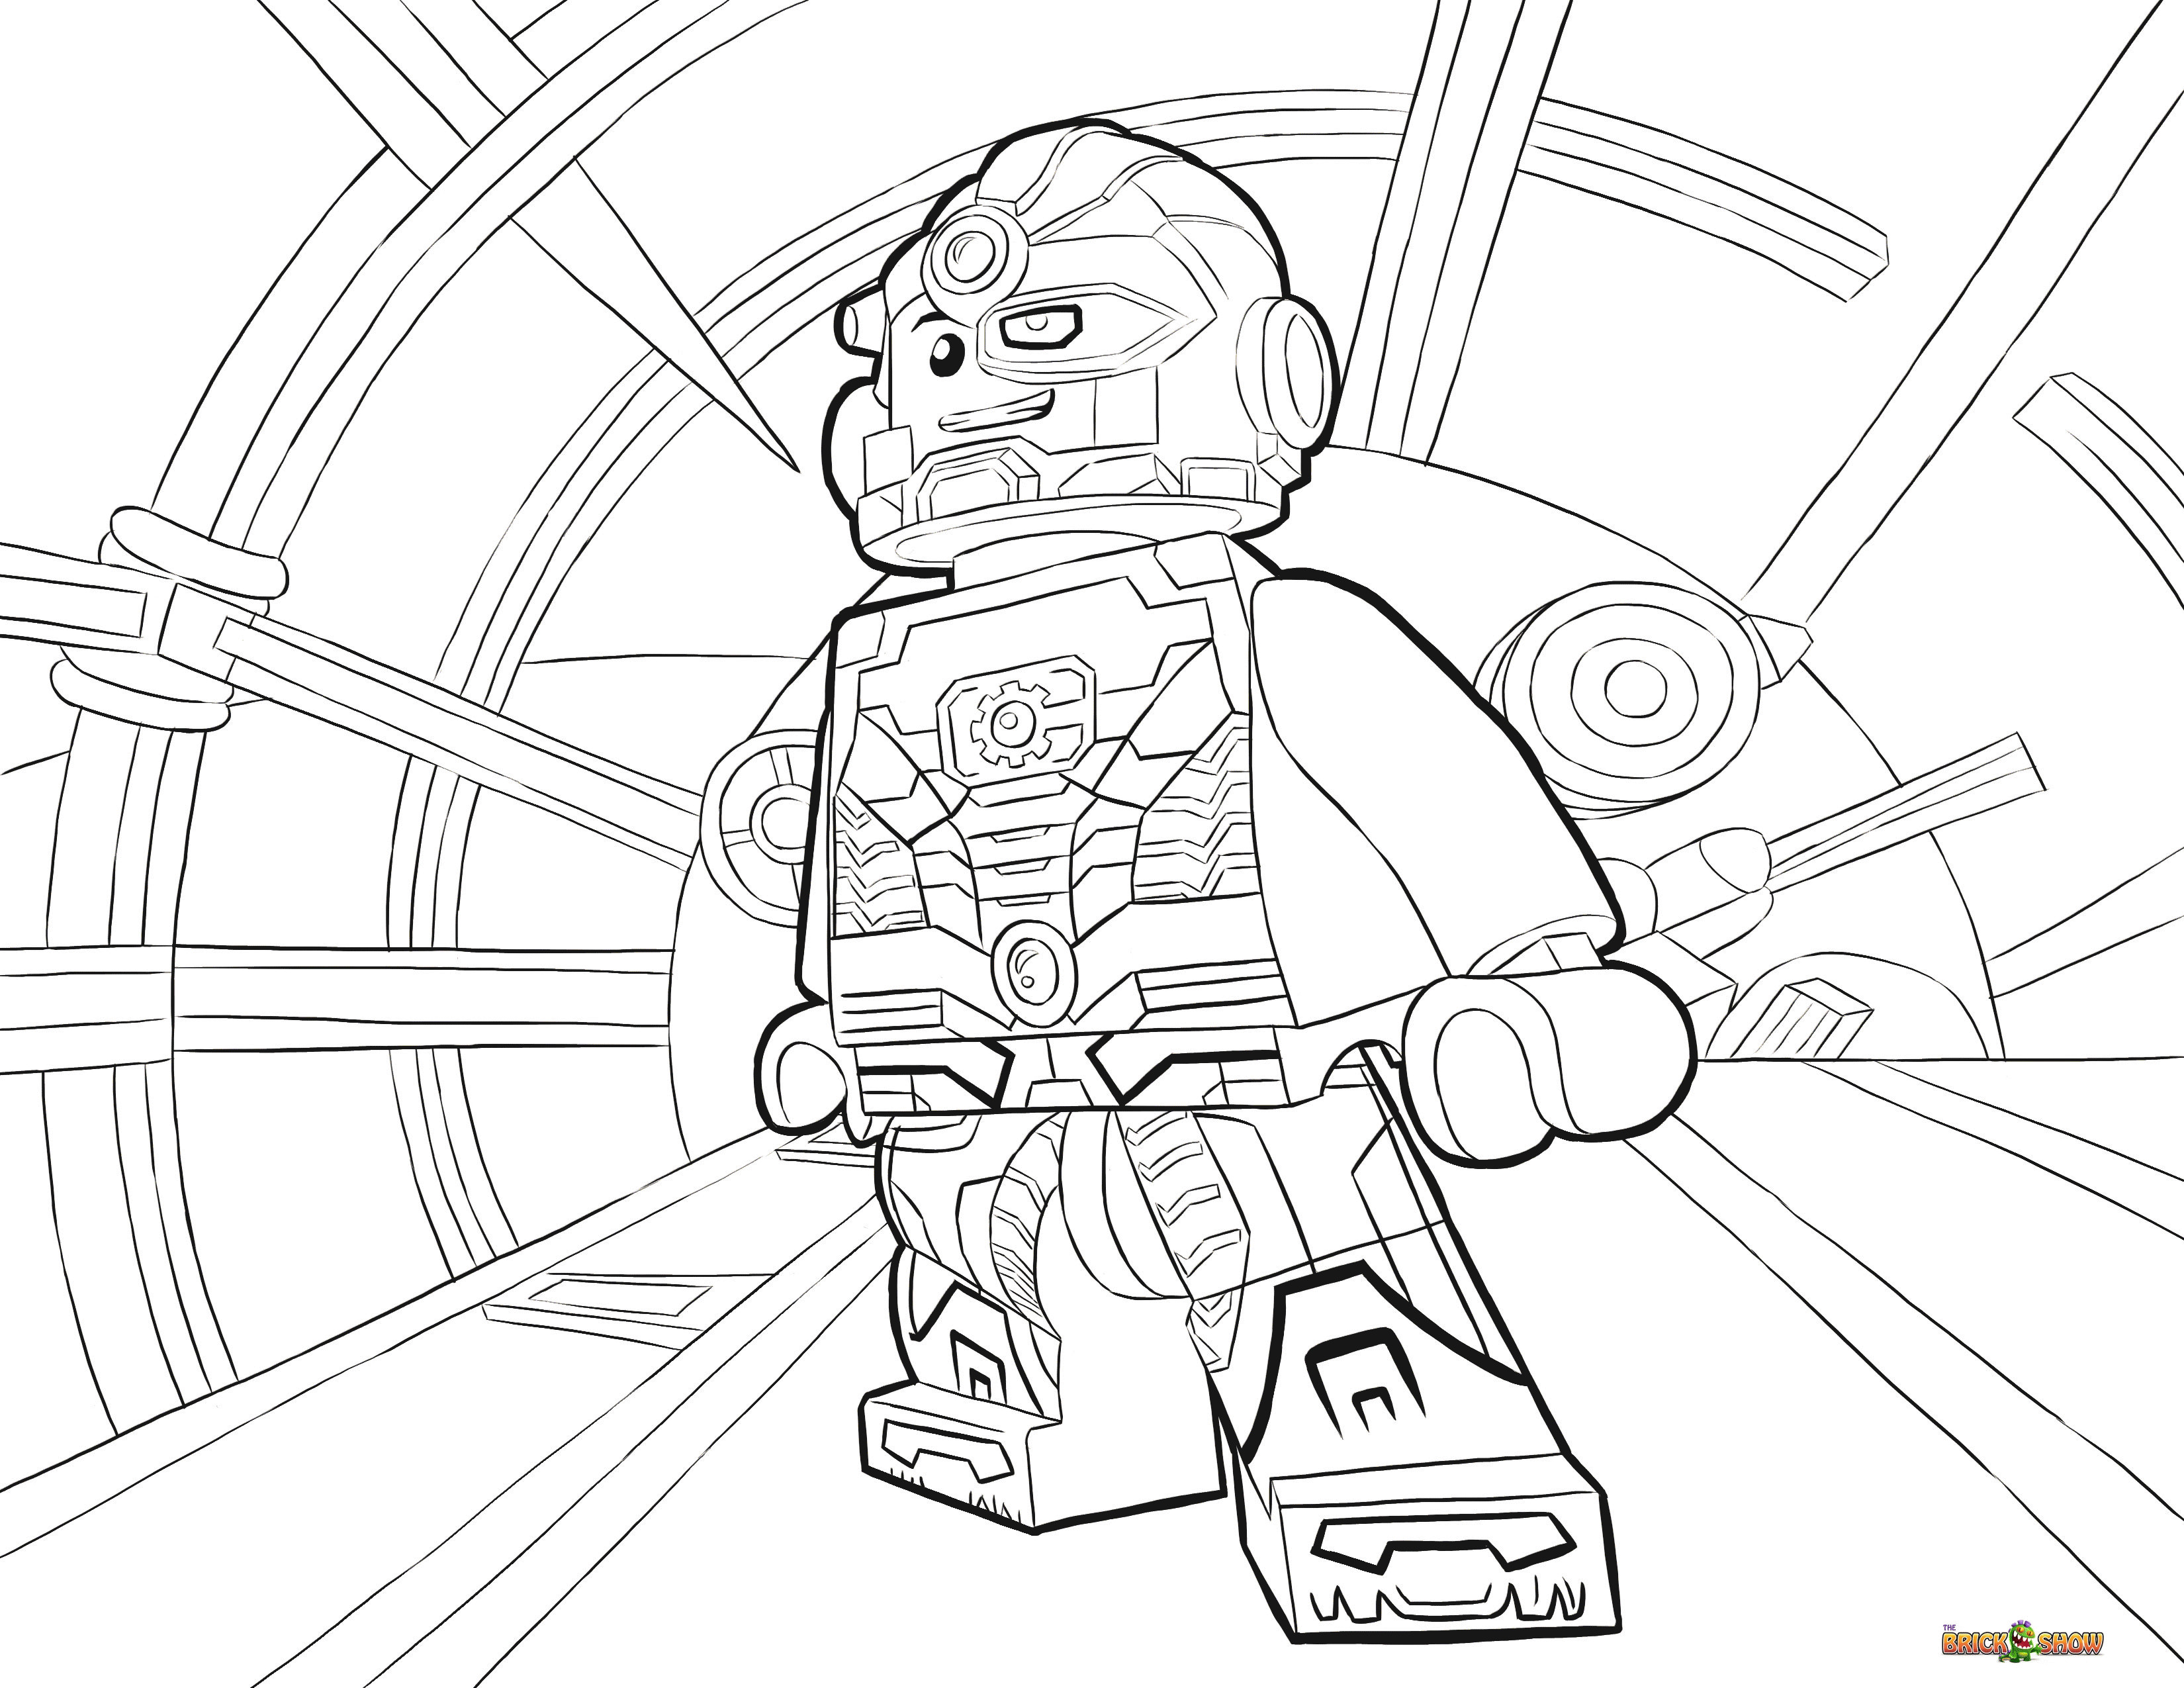 Lego Avengers Coloring Pages
 Lego Avenger Coloring Pages Coloring Home